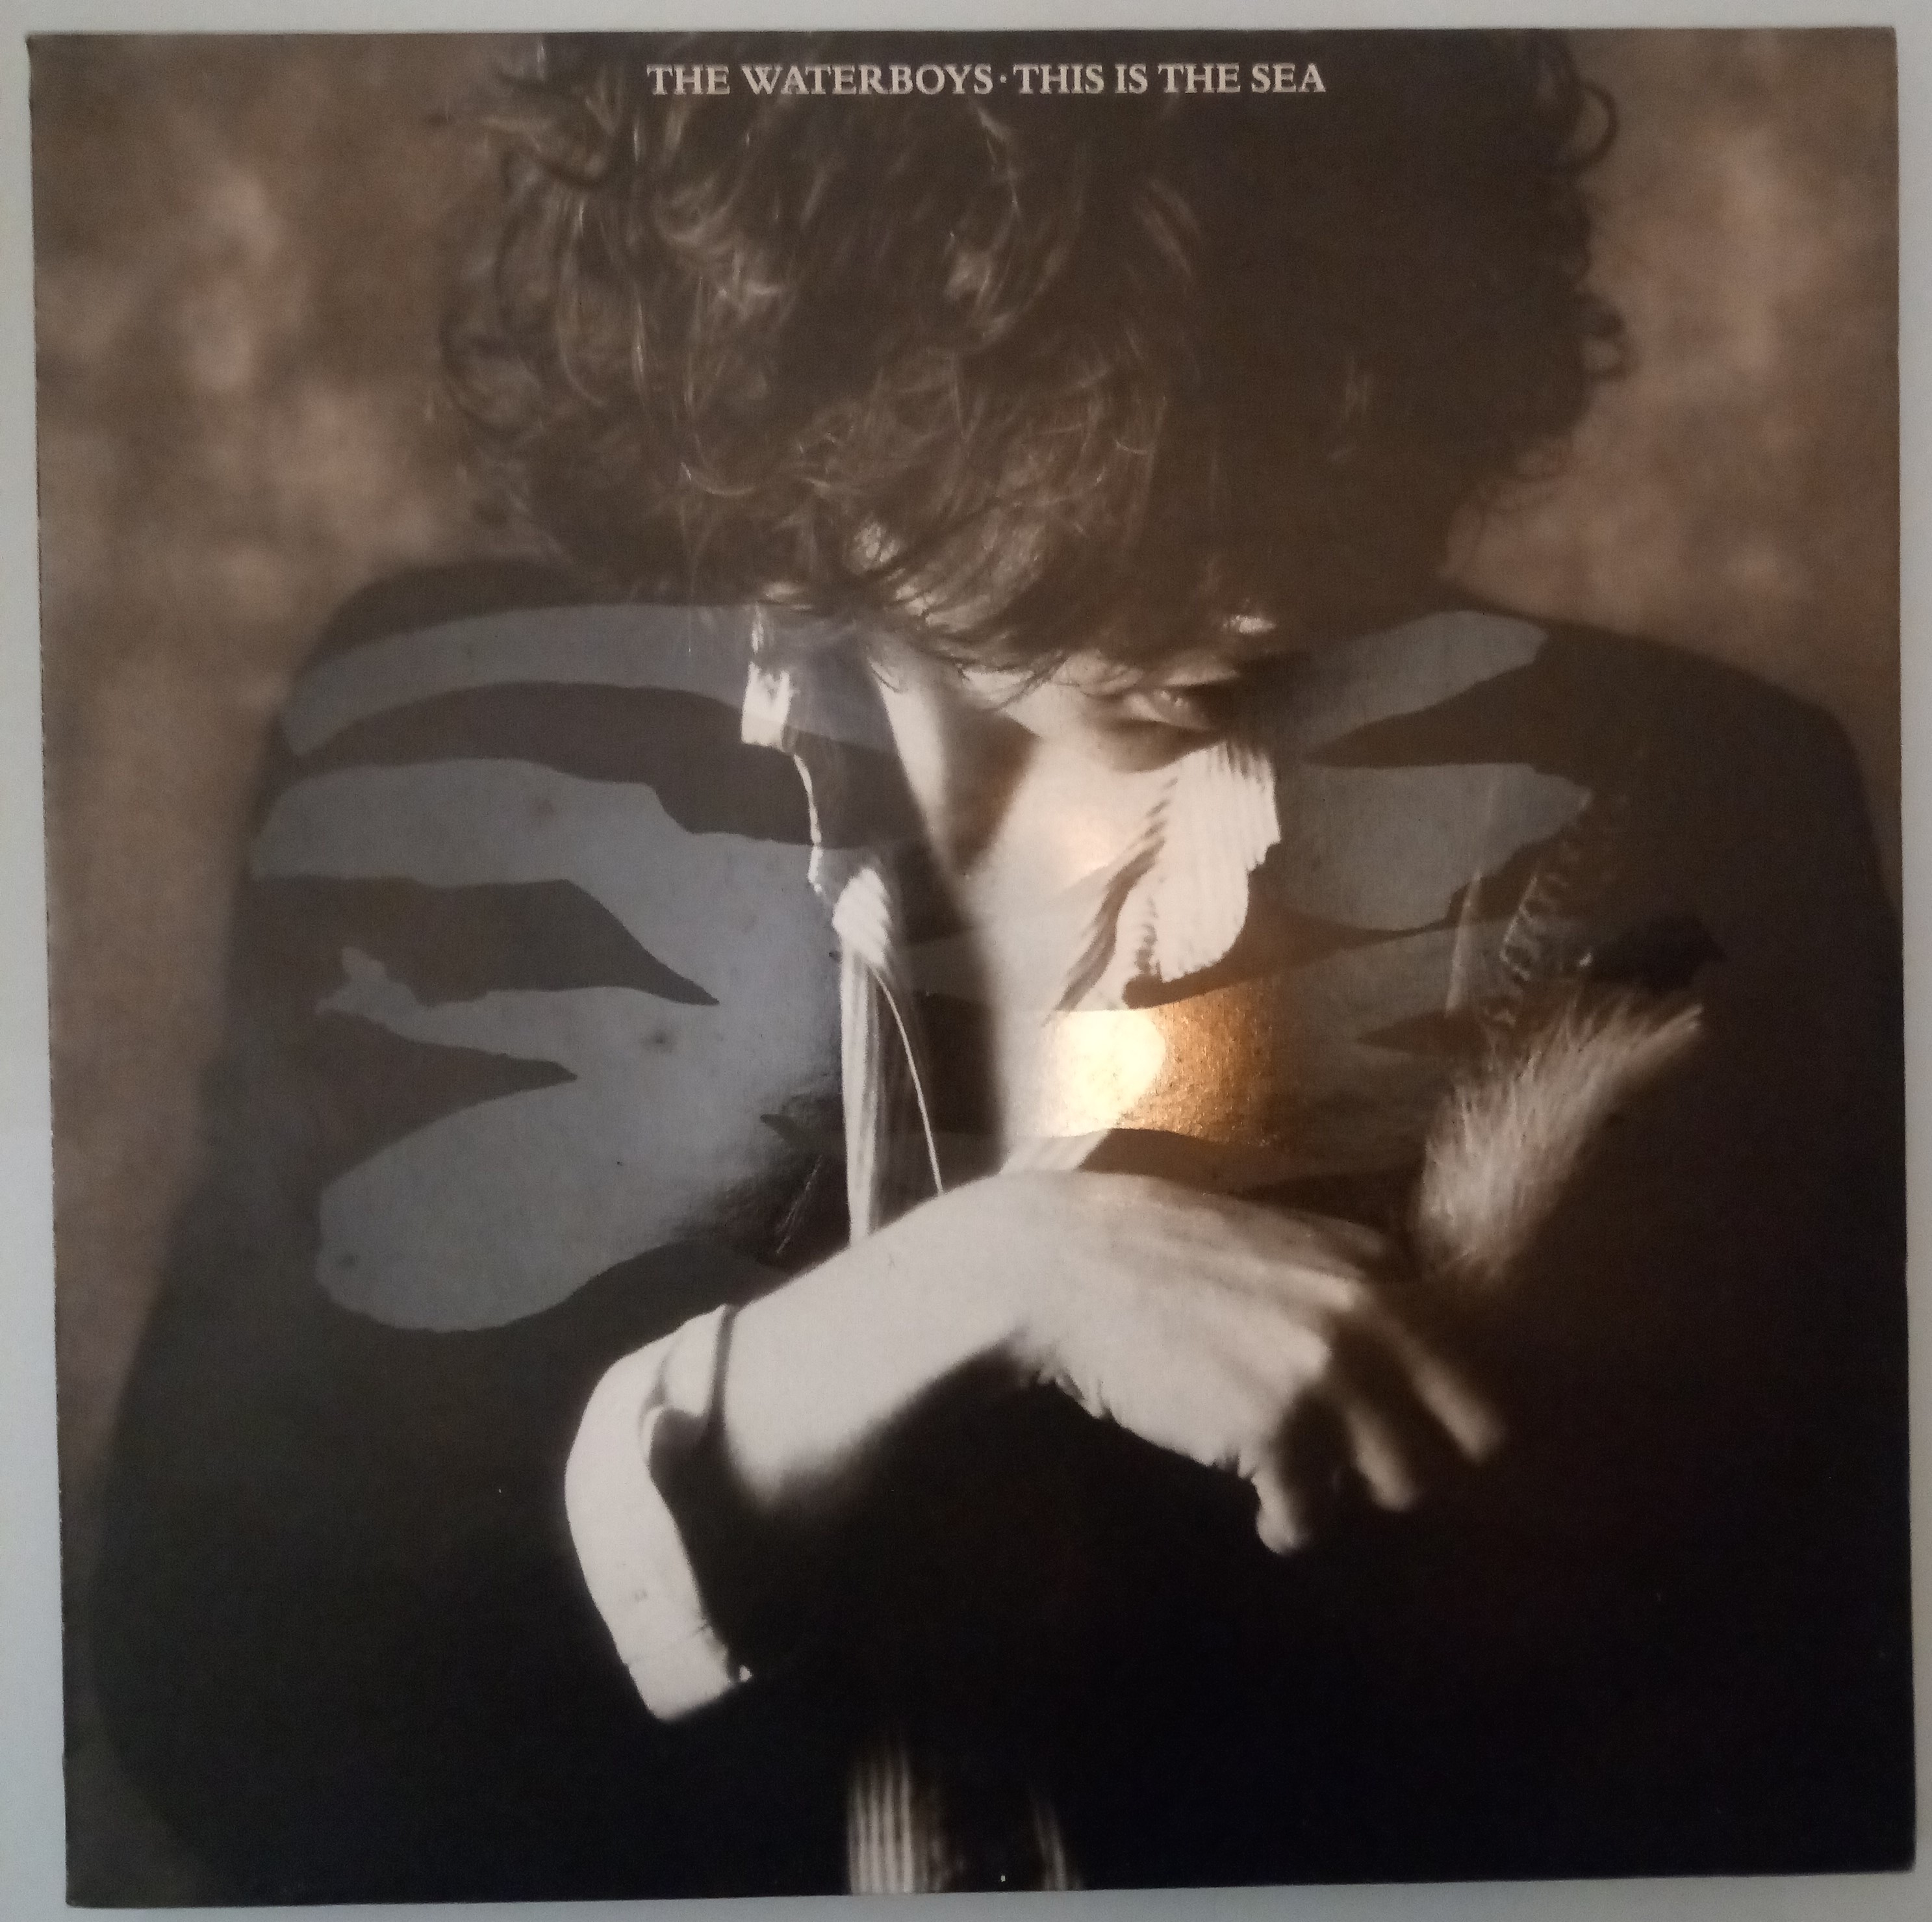 The Waterboys - This Is The Sea - Chen 3 - Excellent Condition. (P) - Image 2 of 7